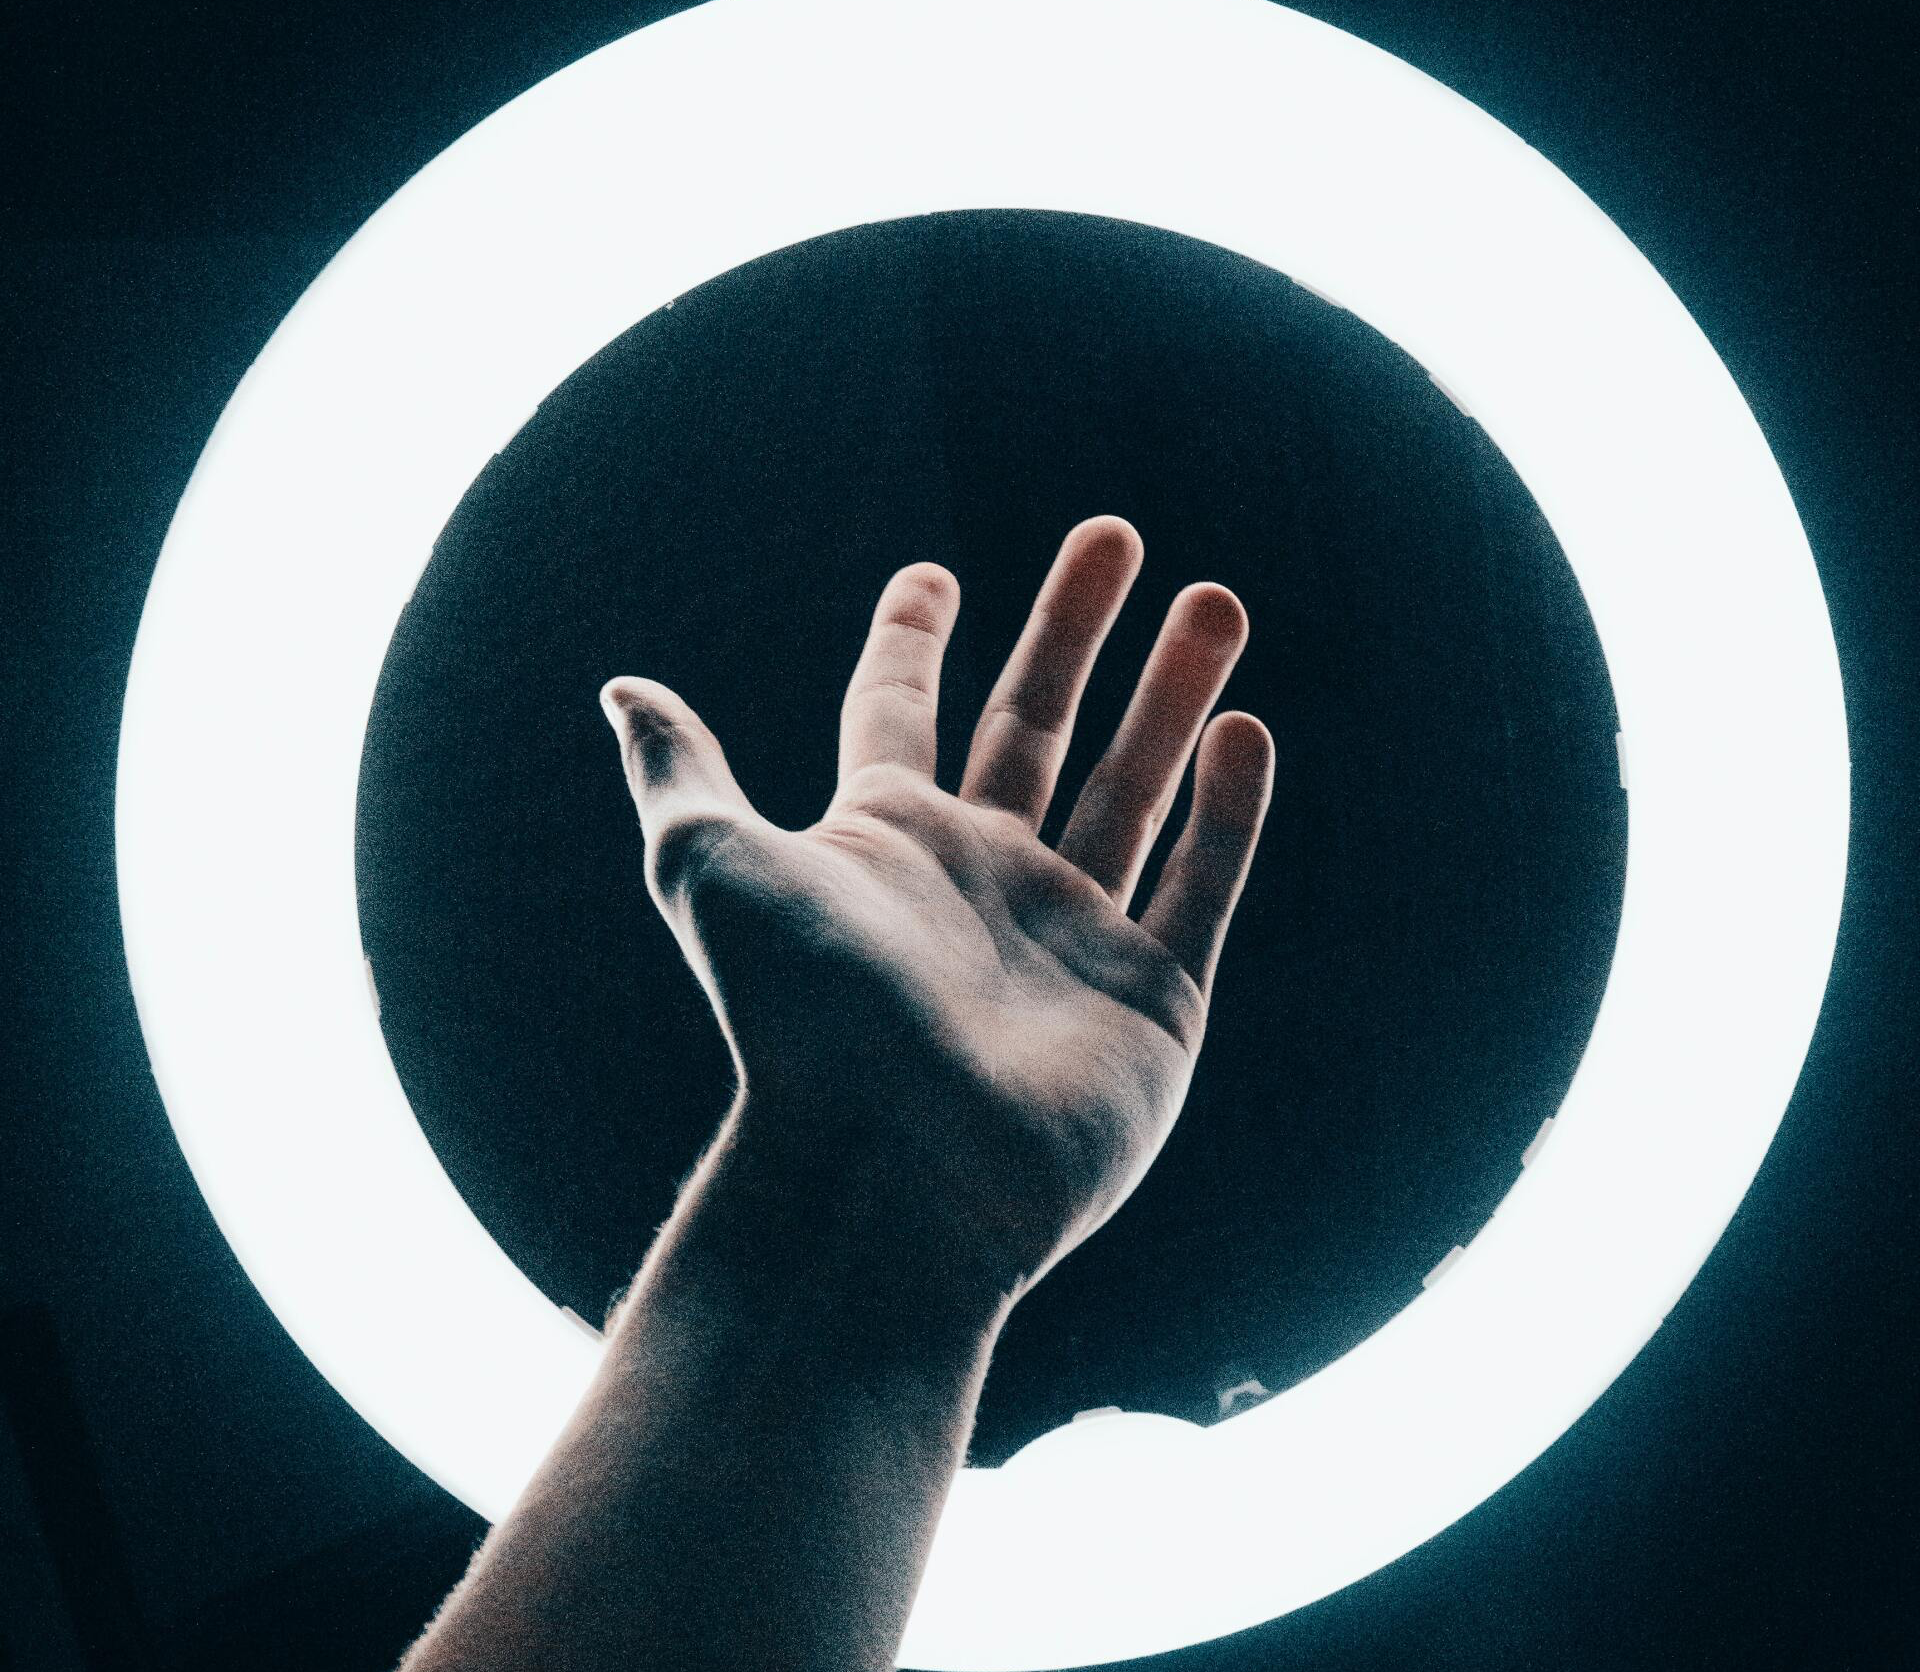 Hand reaching between a white ring light